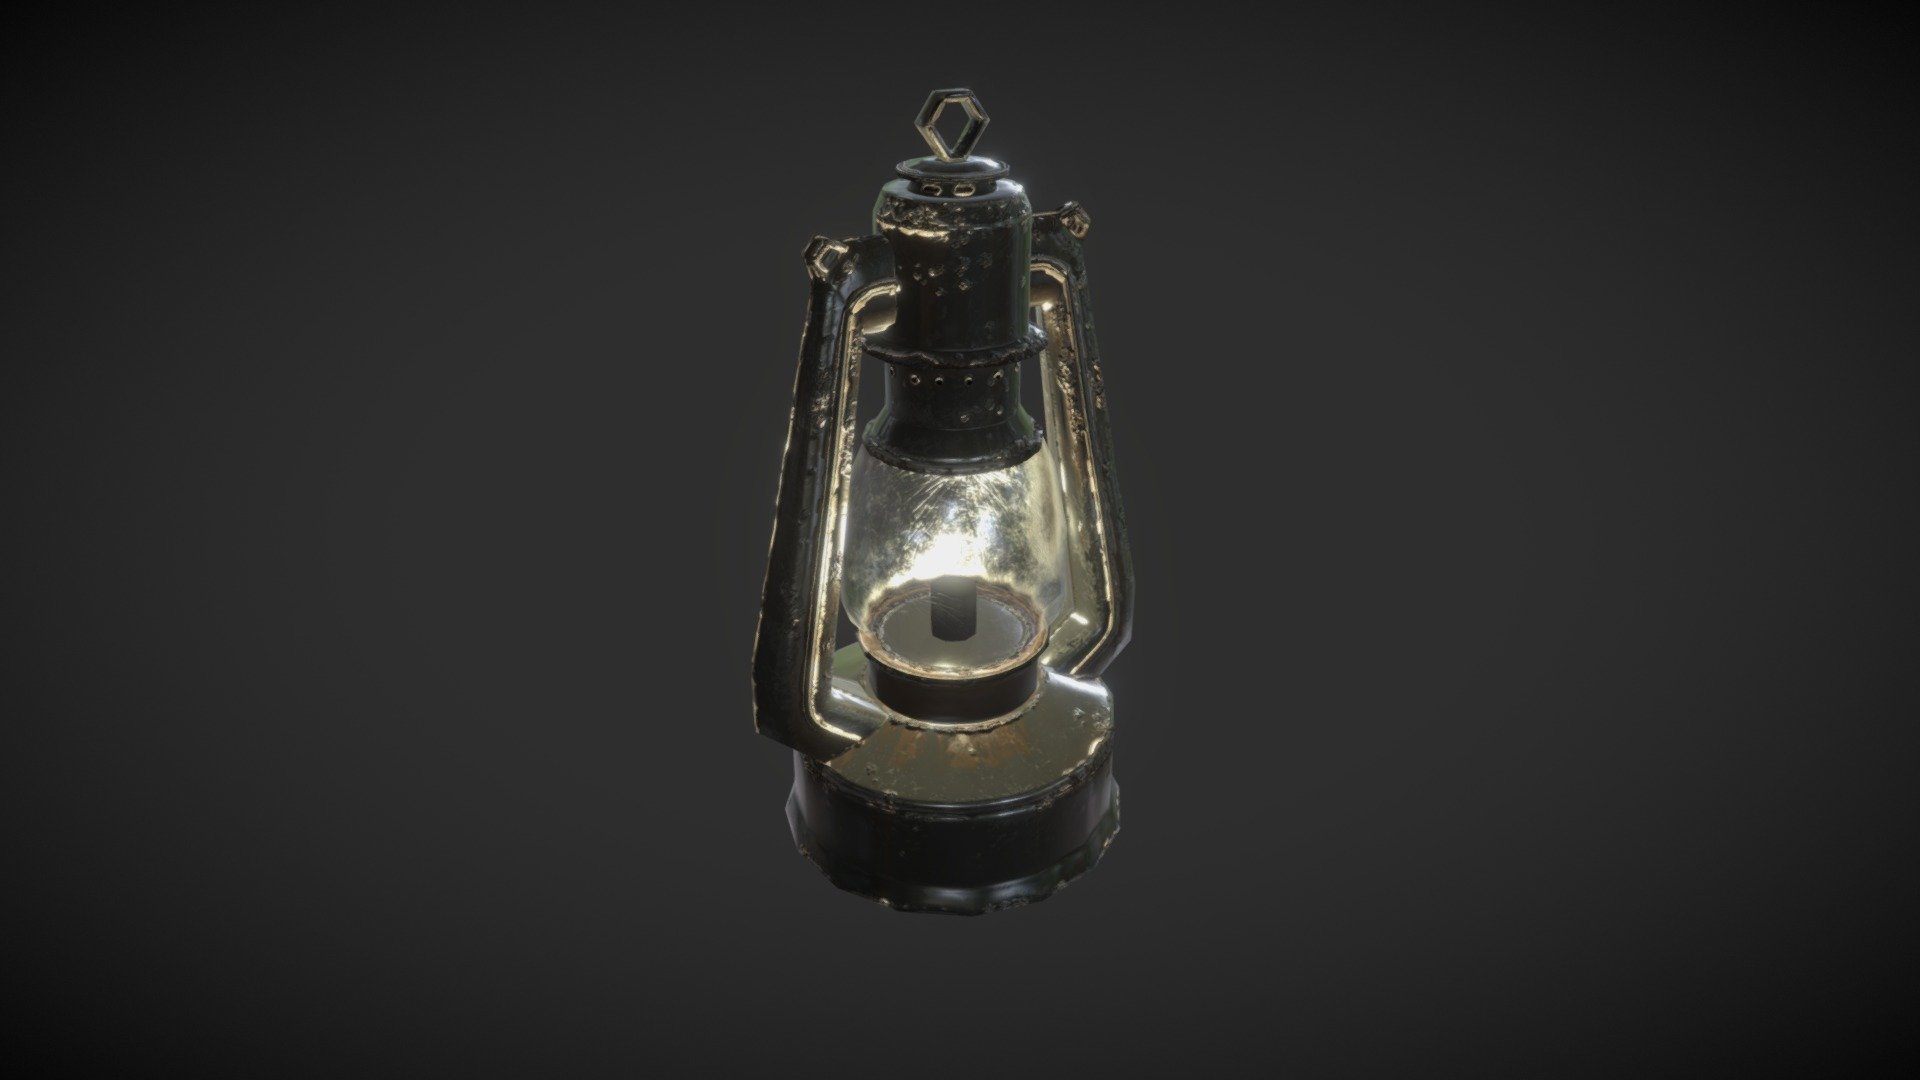 A simple lamp, roughly based on this image

Made with Blender &amp; Substance Painter 3d model